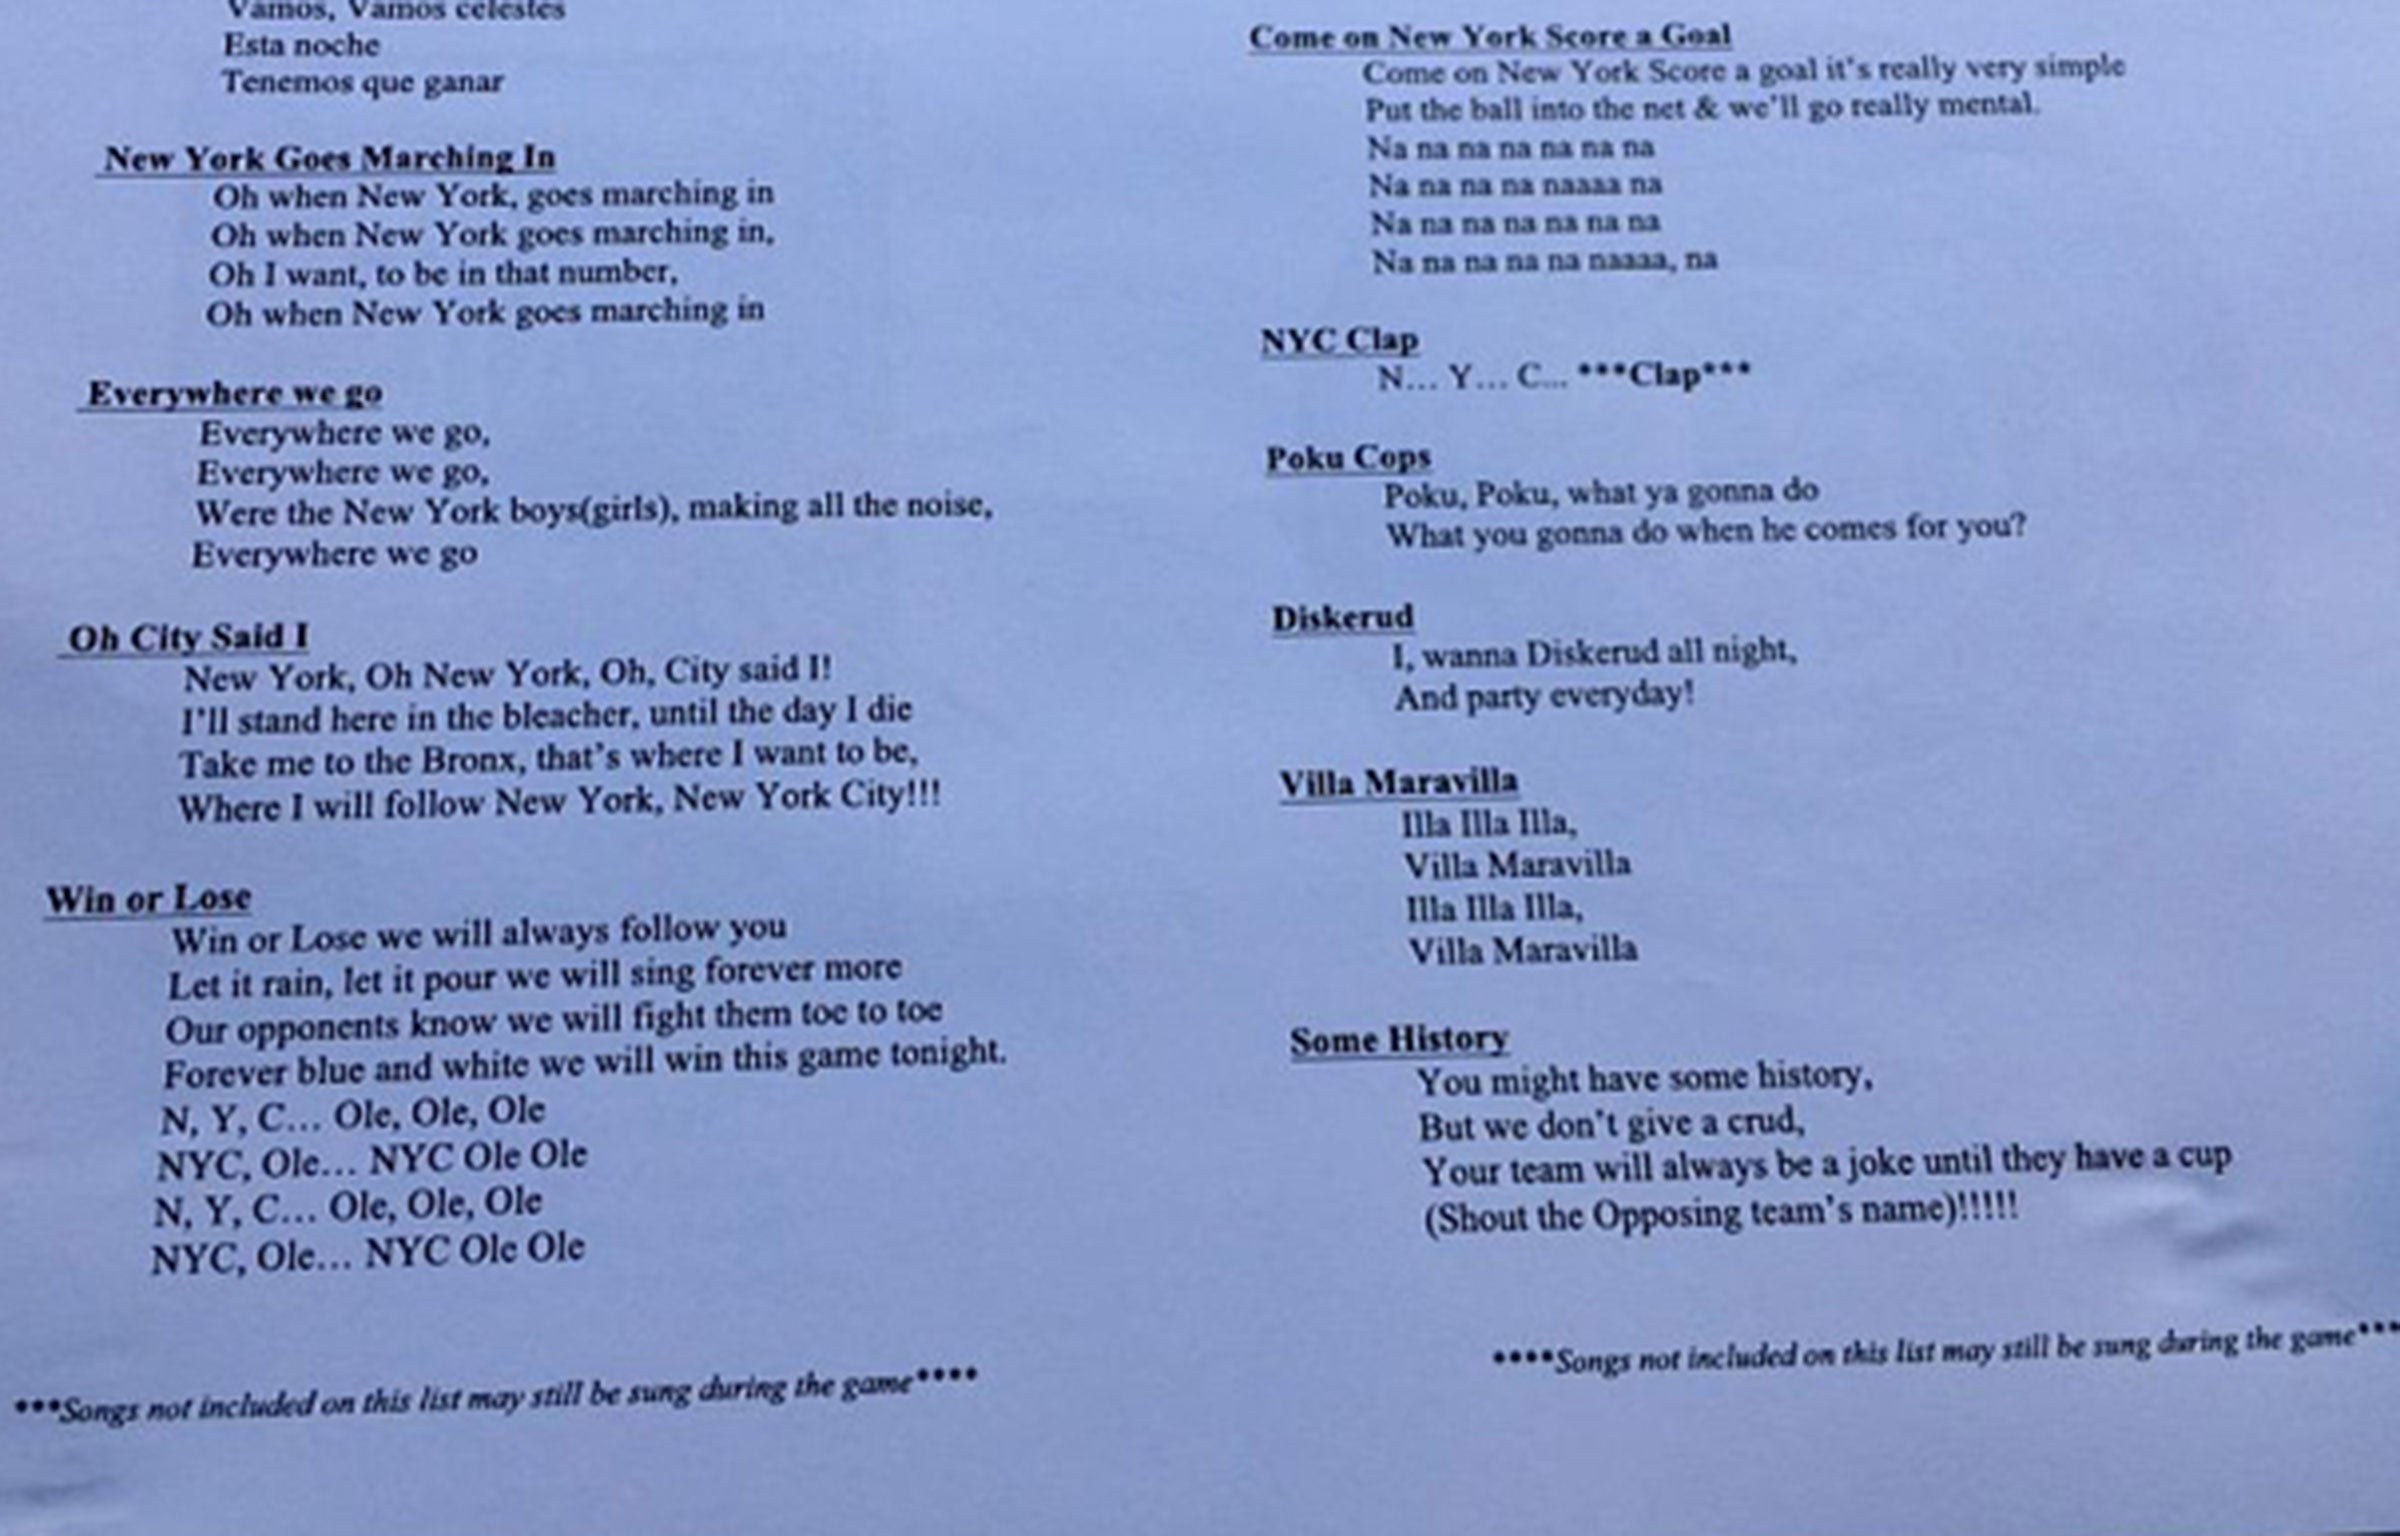 A song sheet issued by New York City FC